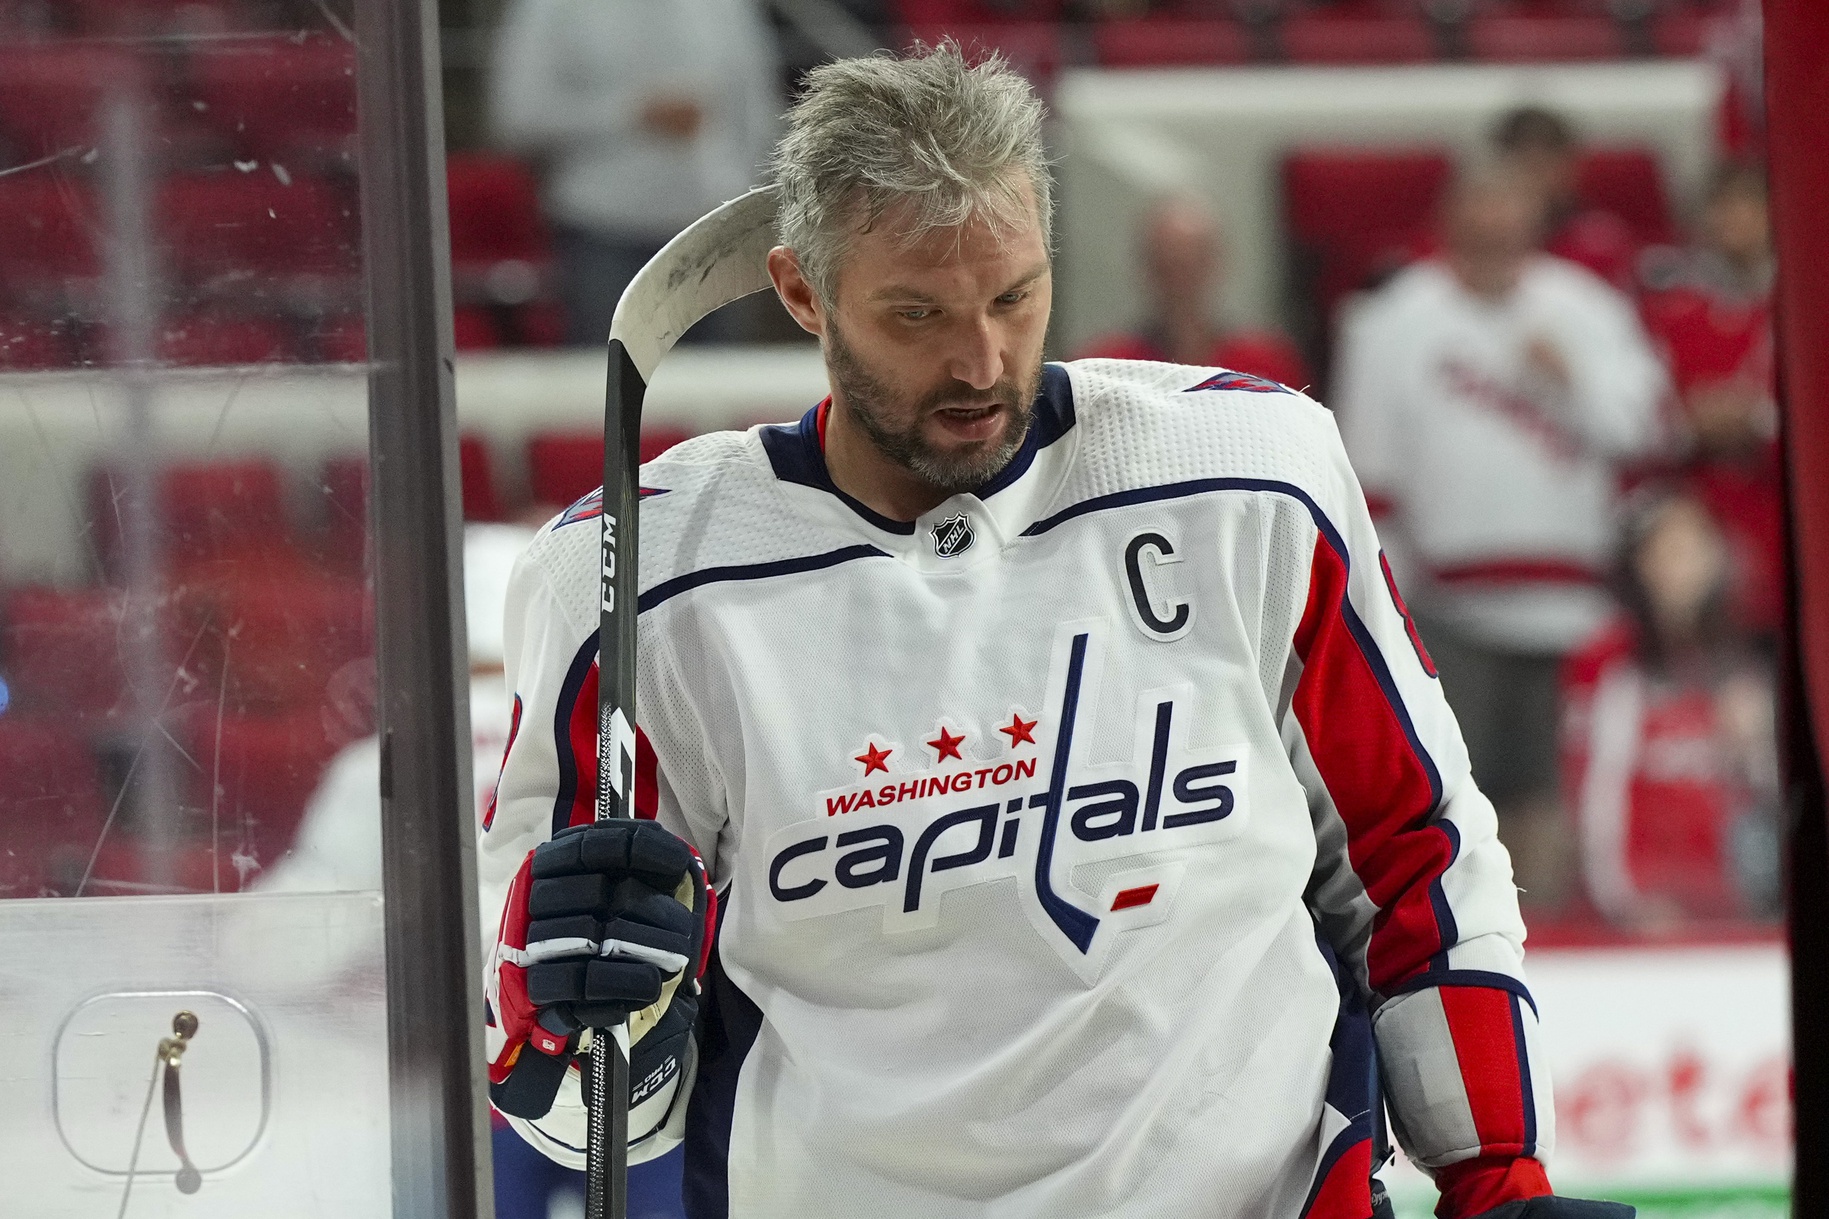 Captials' Alex Ovechkin tied another NHL mark against Flyers